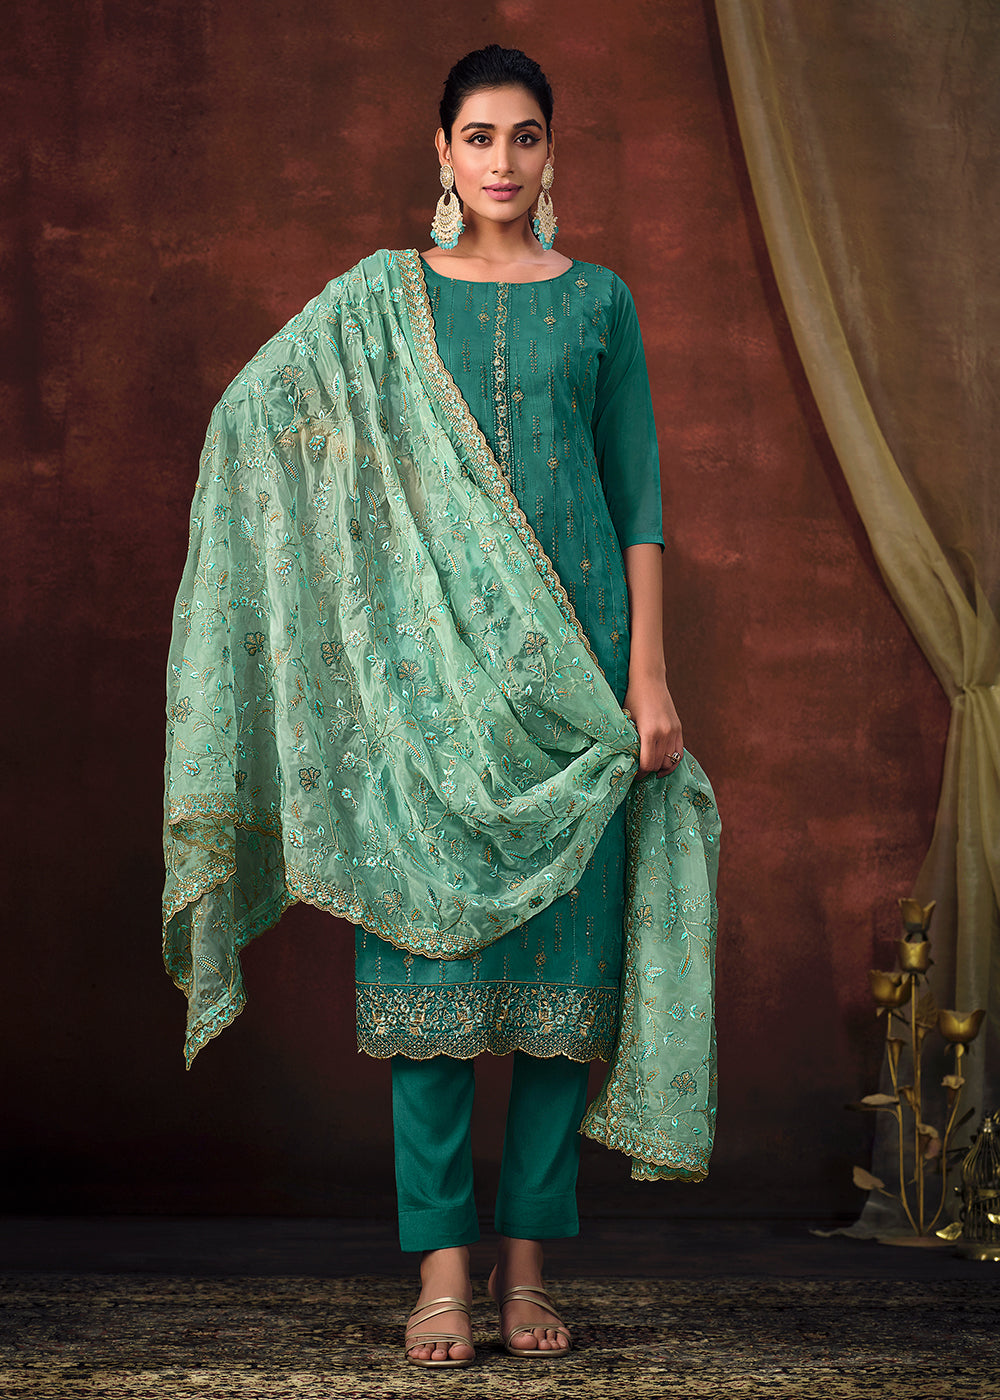 Buy Now Teal Blue Shimmer Organza Embroidered Salwar Suit Online in USA, UK, Canada, Germany, Australia & Worldwide at Empress Clothing. 